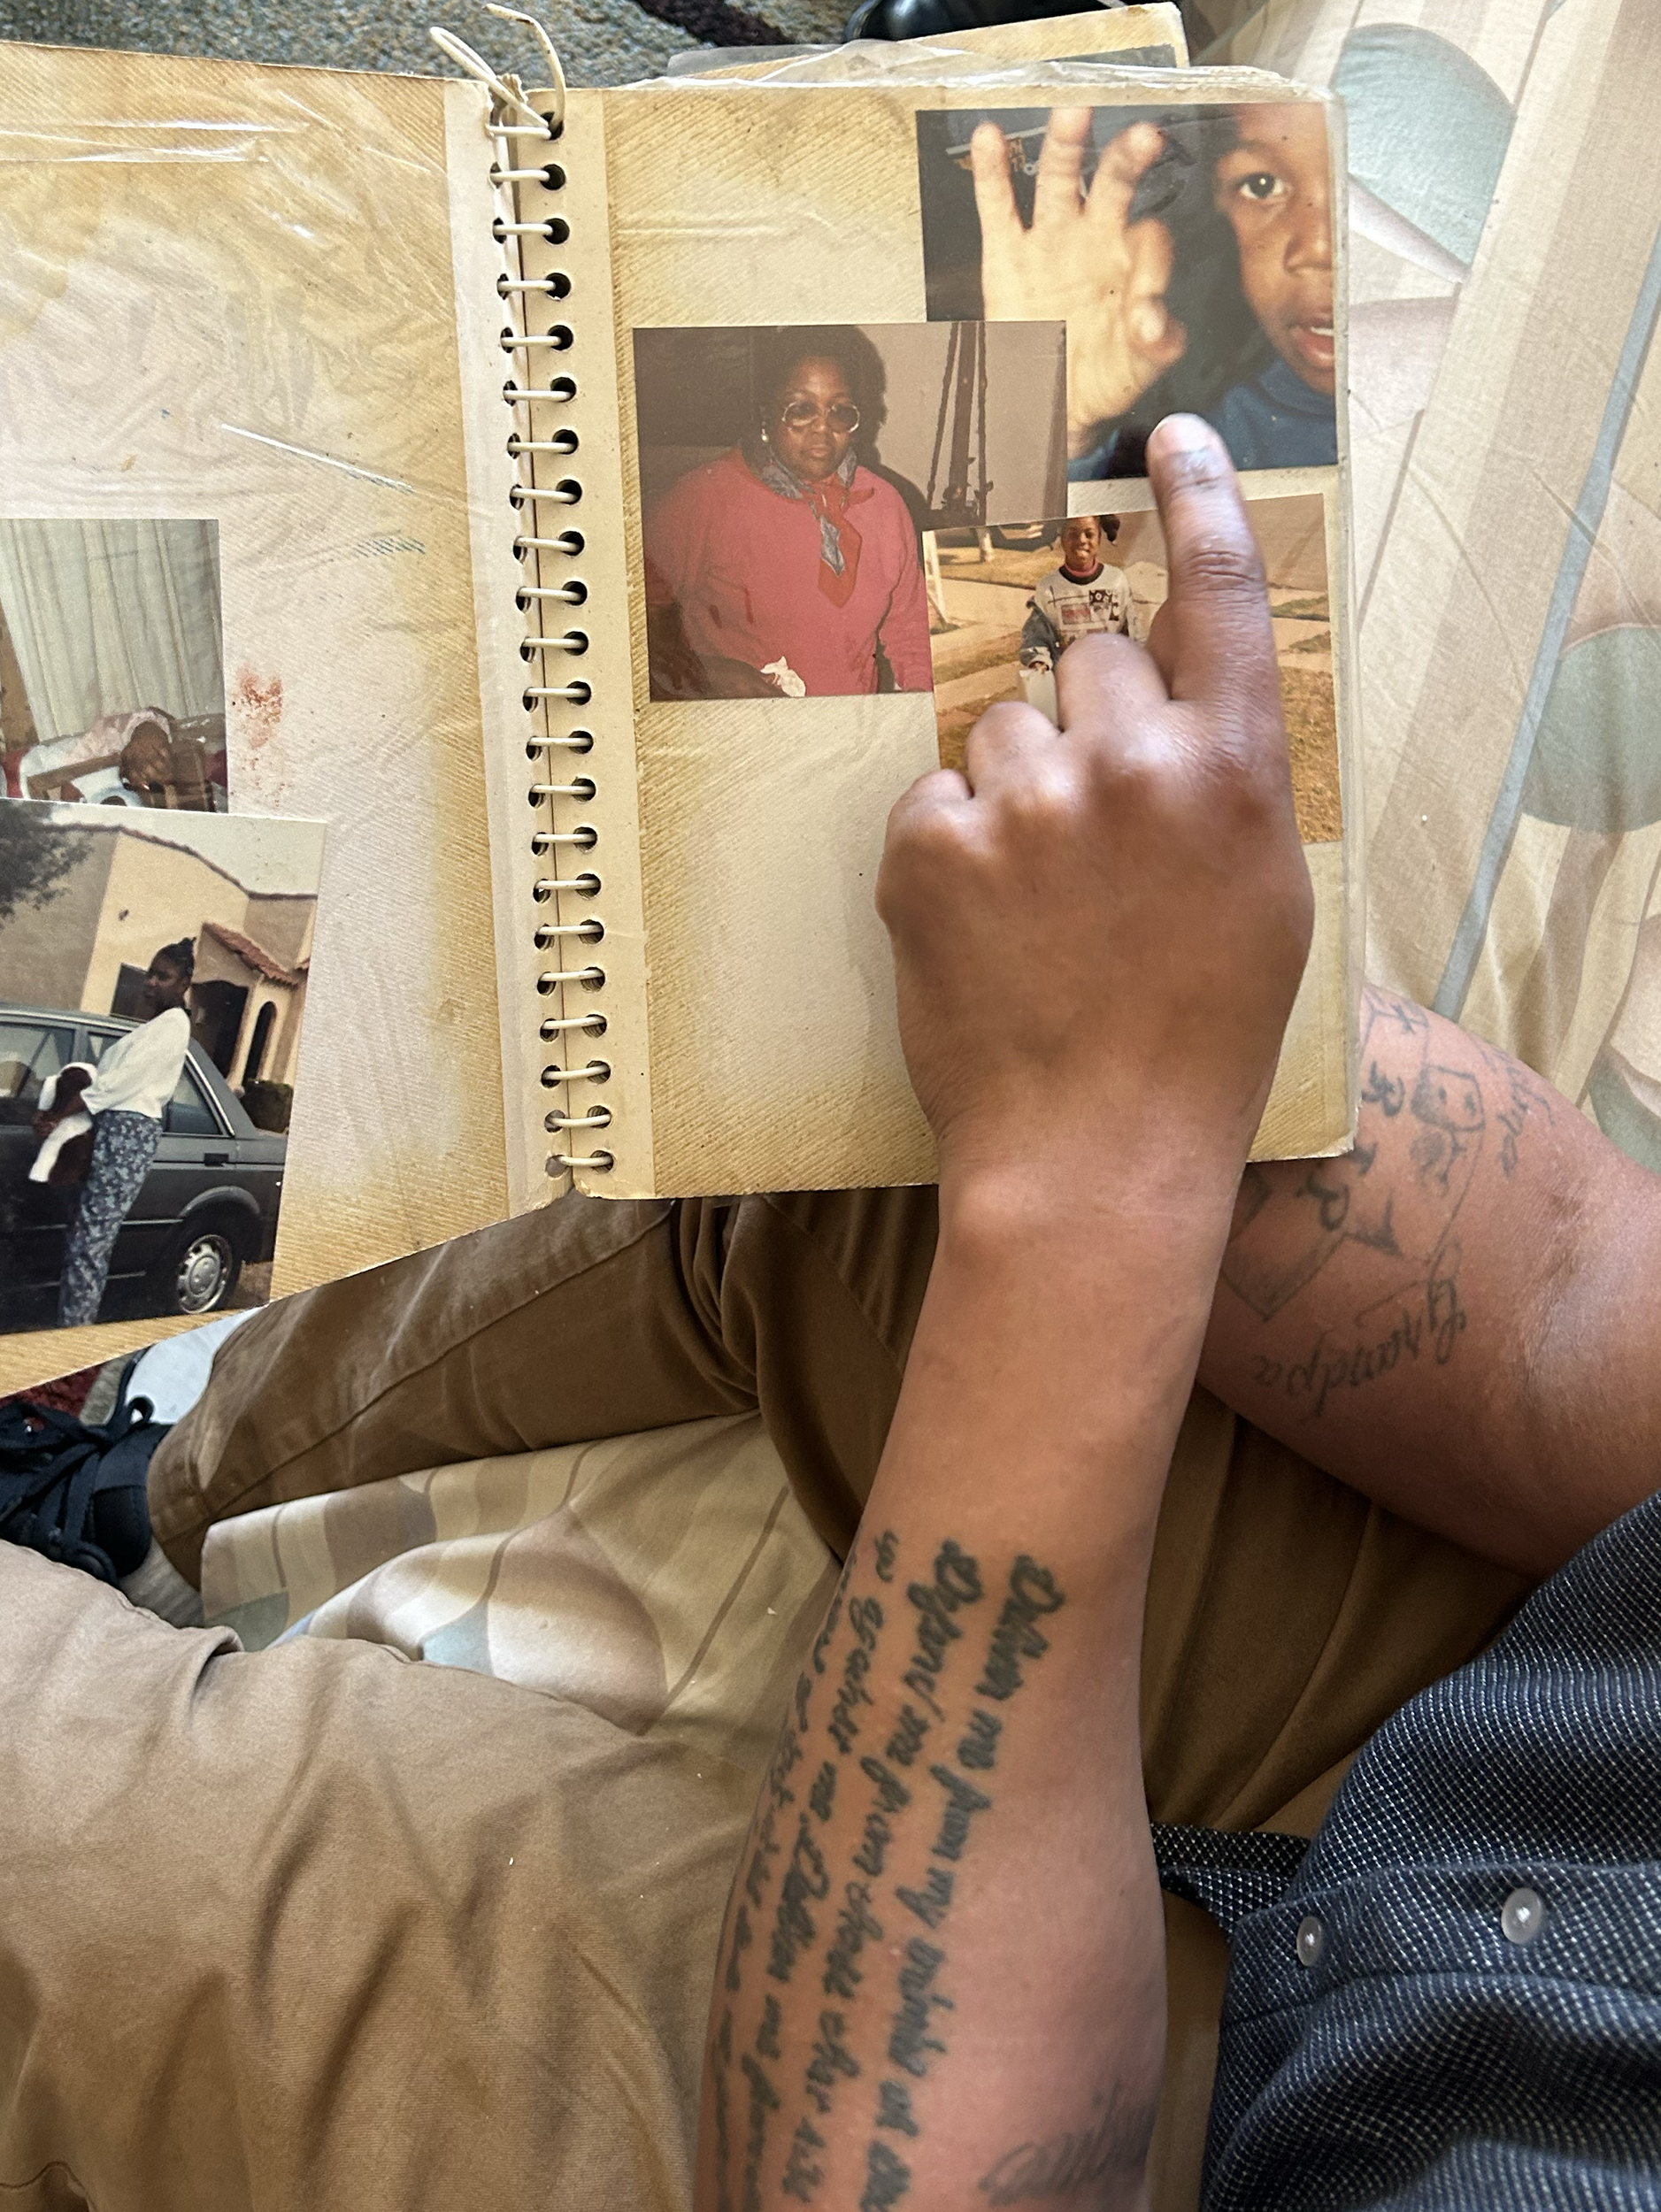 A black man’s tattooed arm hovers over a photo album as his hand points to a photo of a Black child (himself) making signs with his fingers.